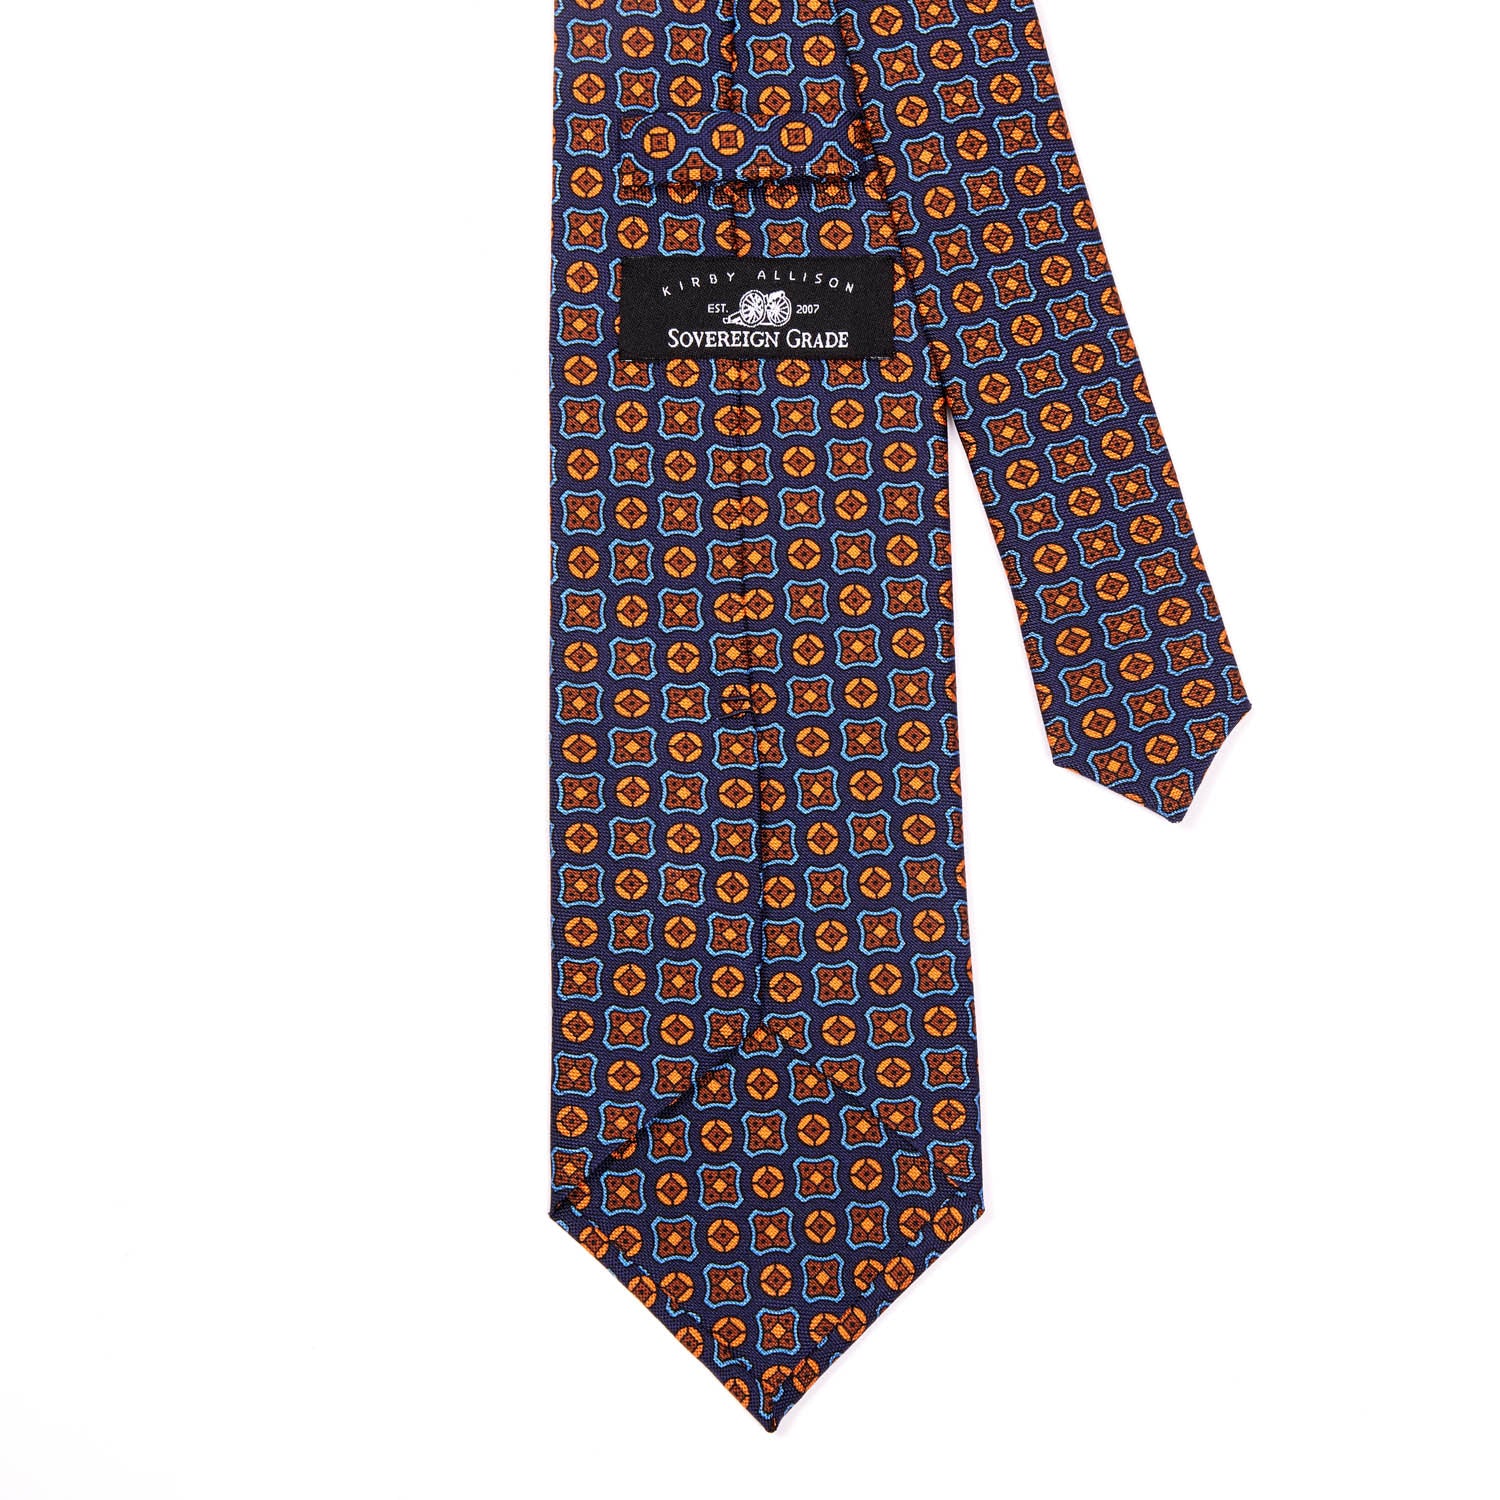 A Sovereign Grade Navy Hopsack Tie, 150 cm from KirbyAllison.com with an orange and blue pattern.